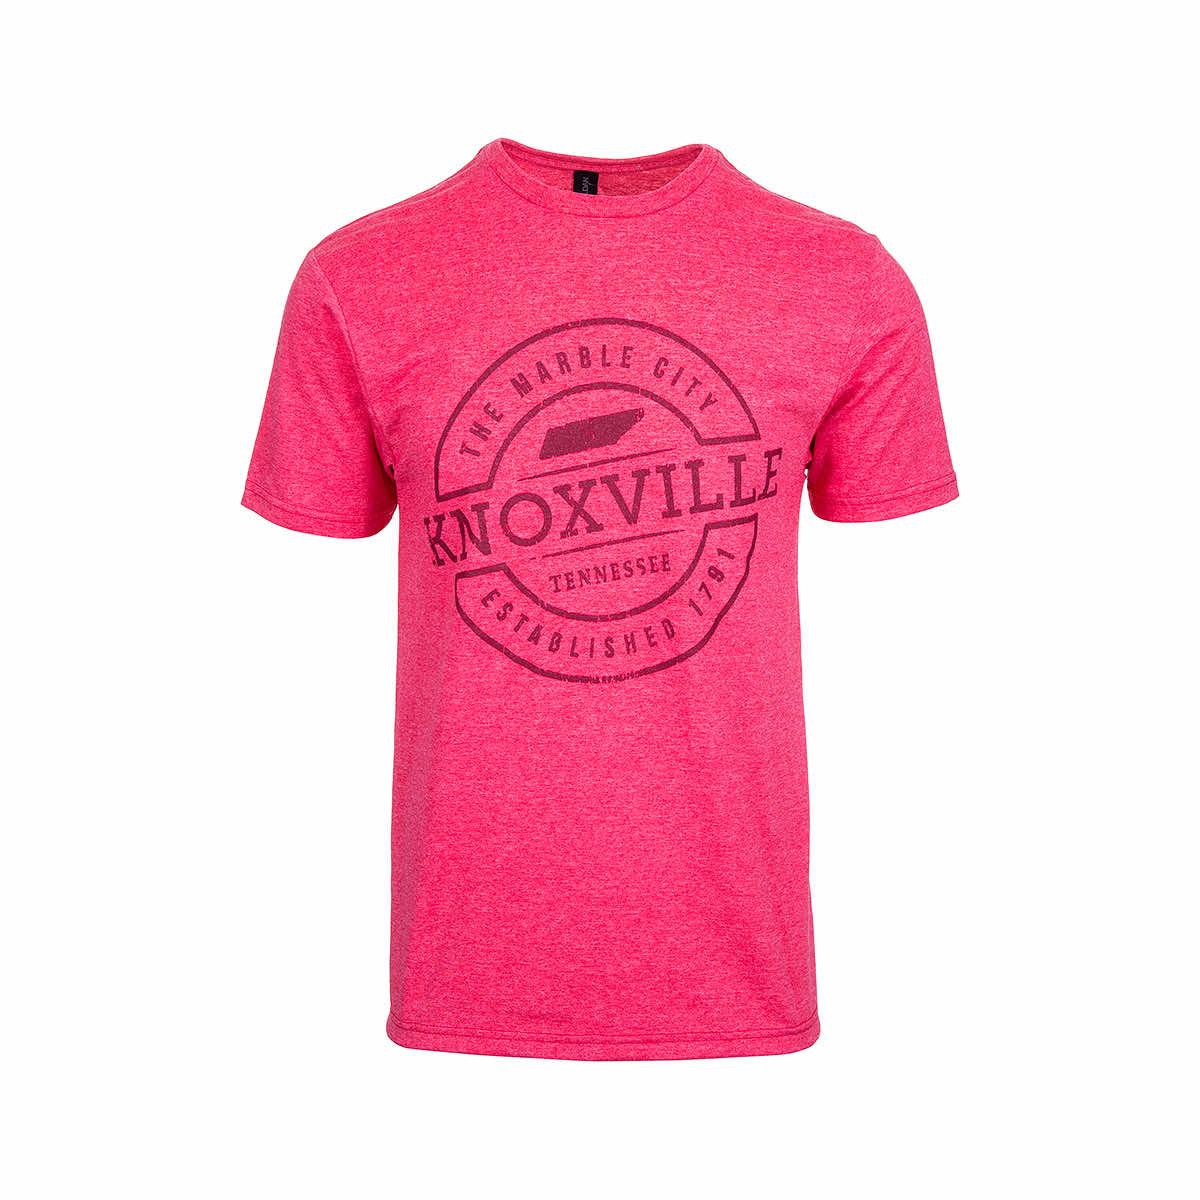  Knoxville Marble City Short Sleeve T- Shirt